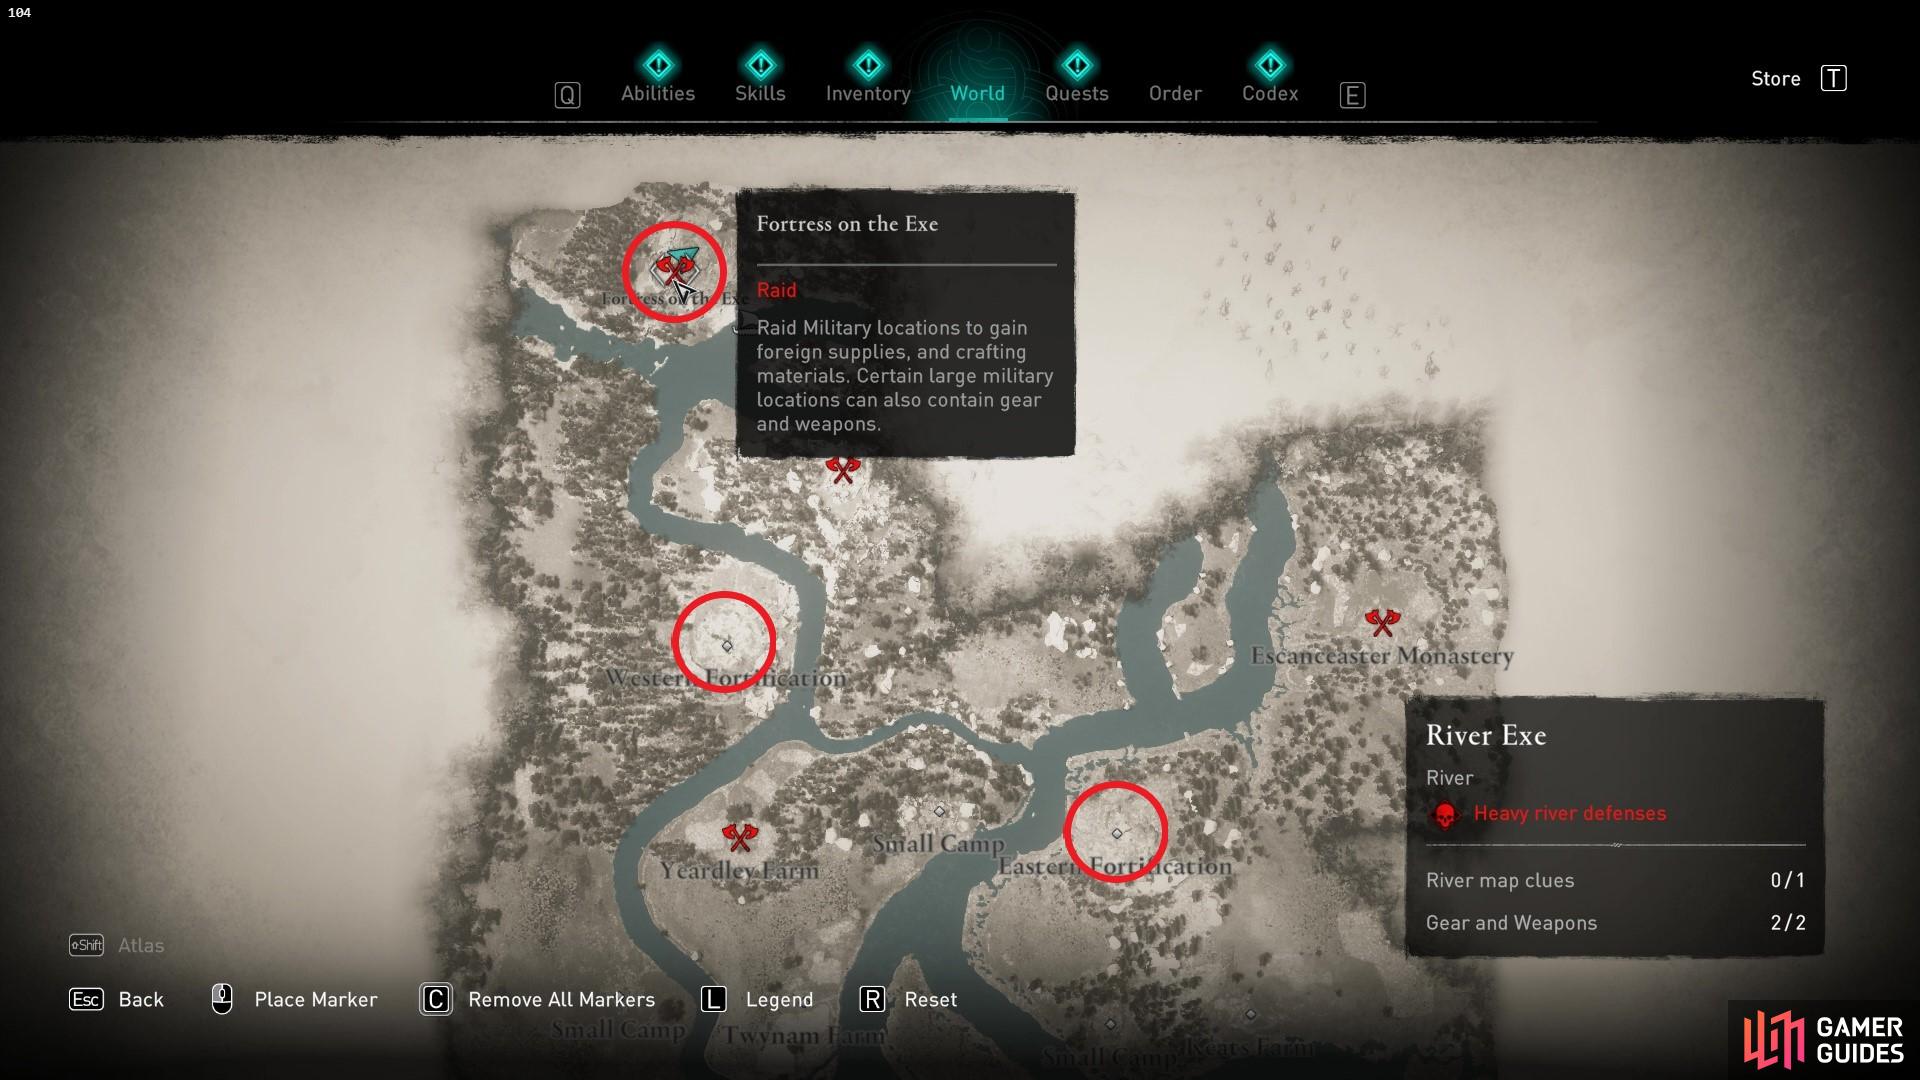 There are three large military locations to choose from where the armor might spawn. 